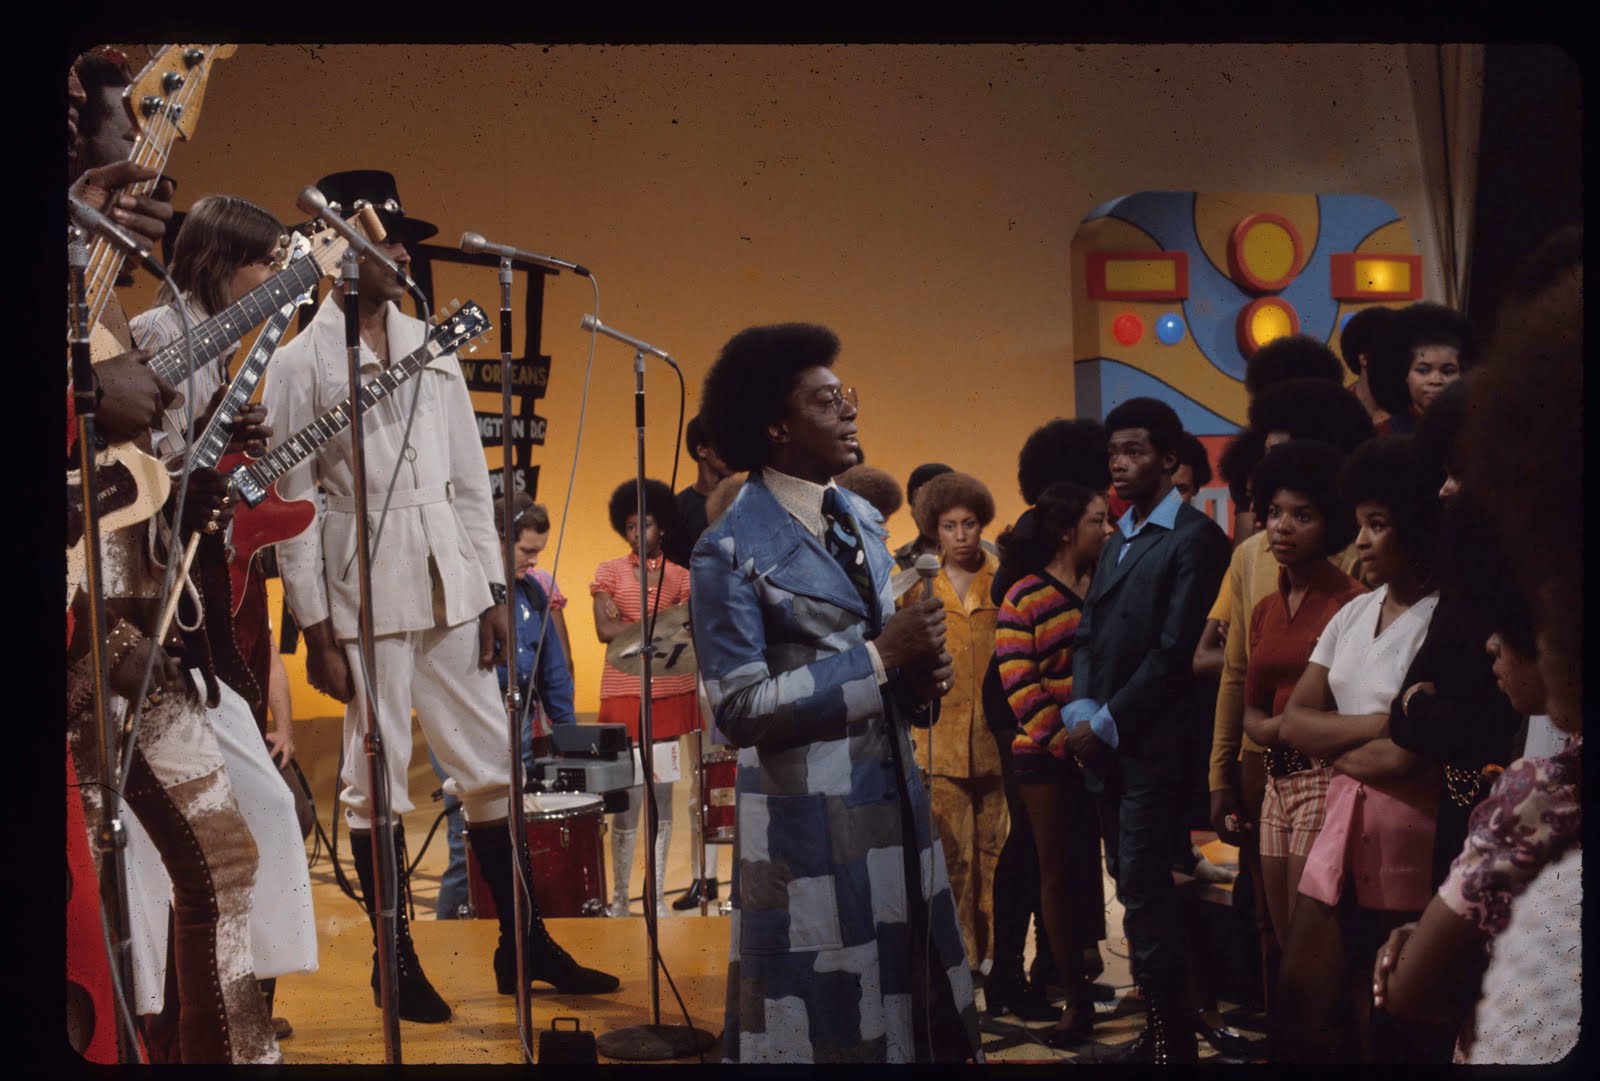 Soul to soul: gettin' the groove on soul train! 